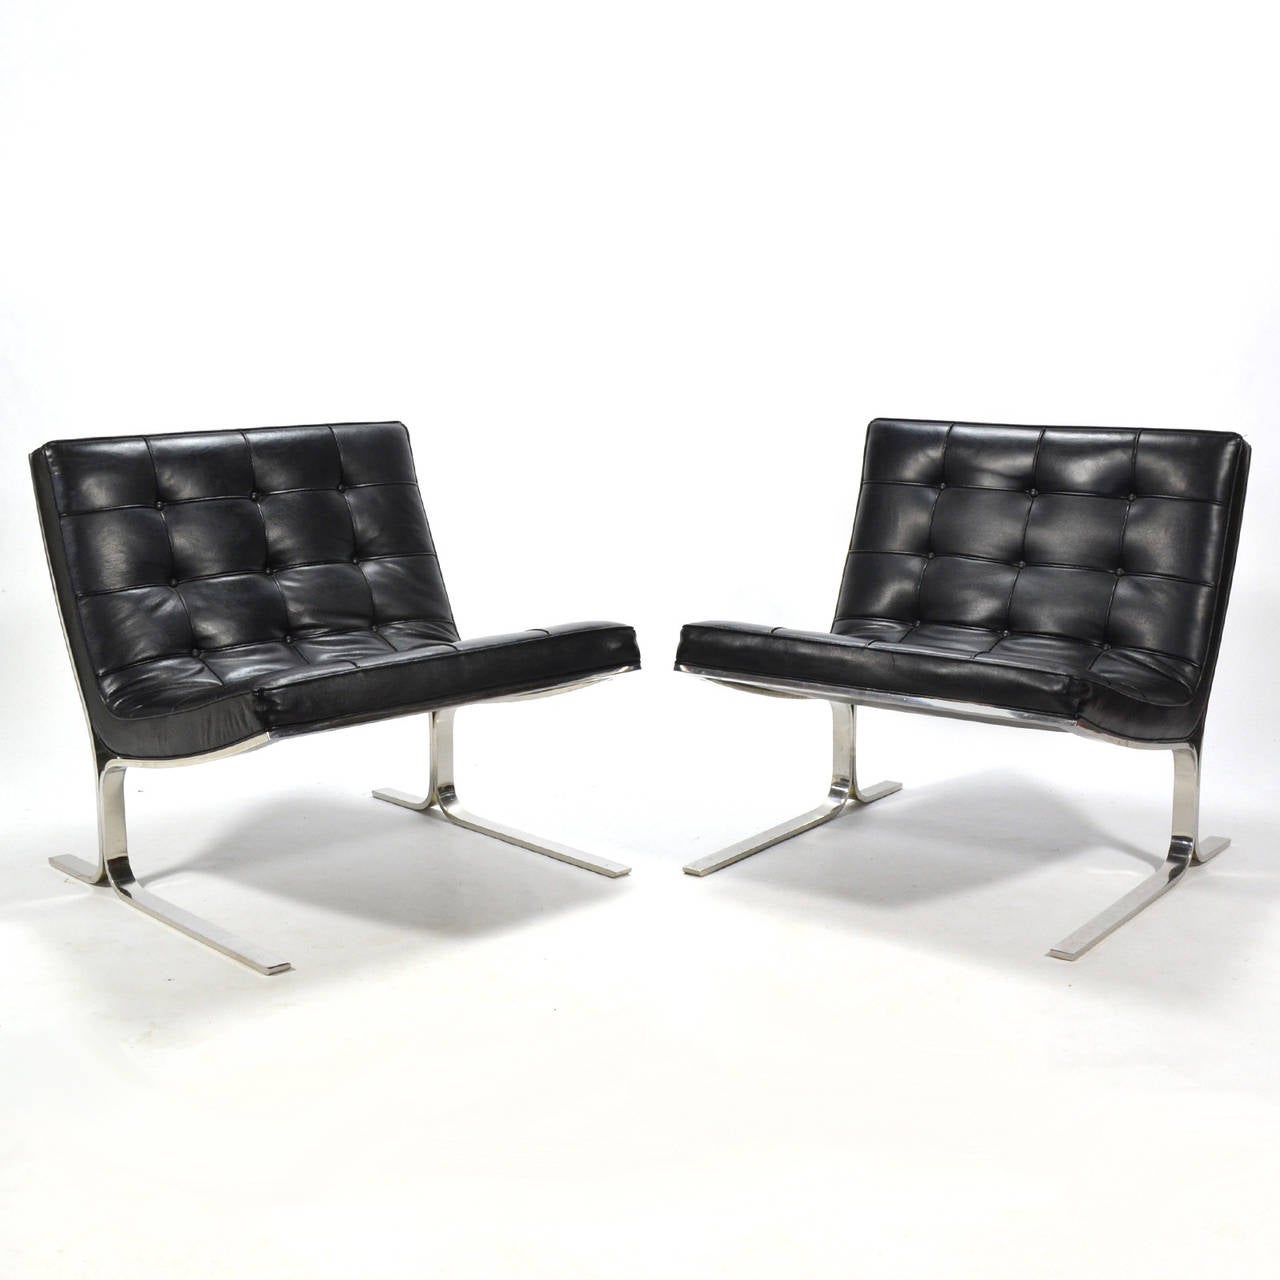 Nicos Zographos Pair of Lounge Chairs In Good Condition For Sale In Highland, IN